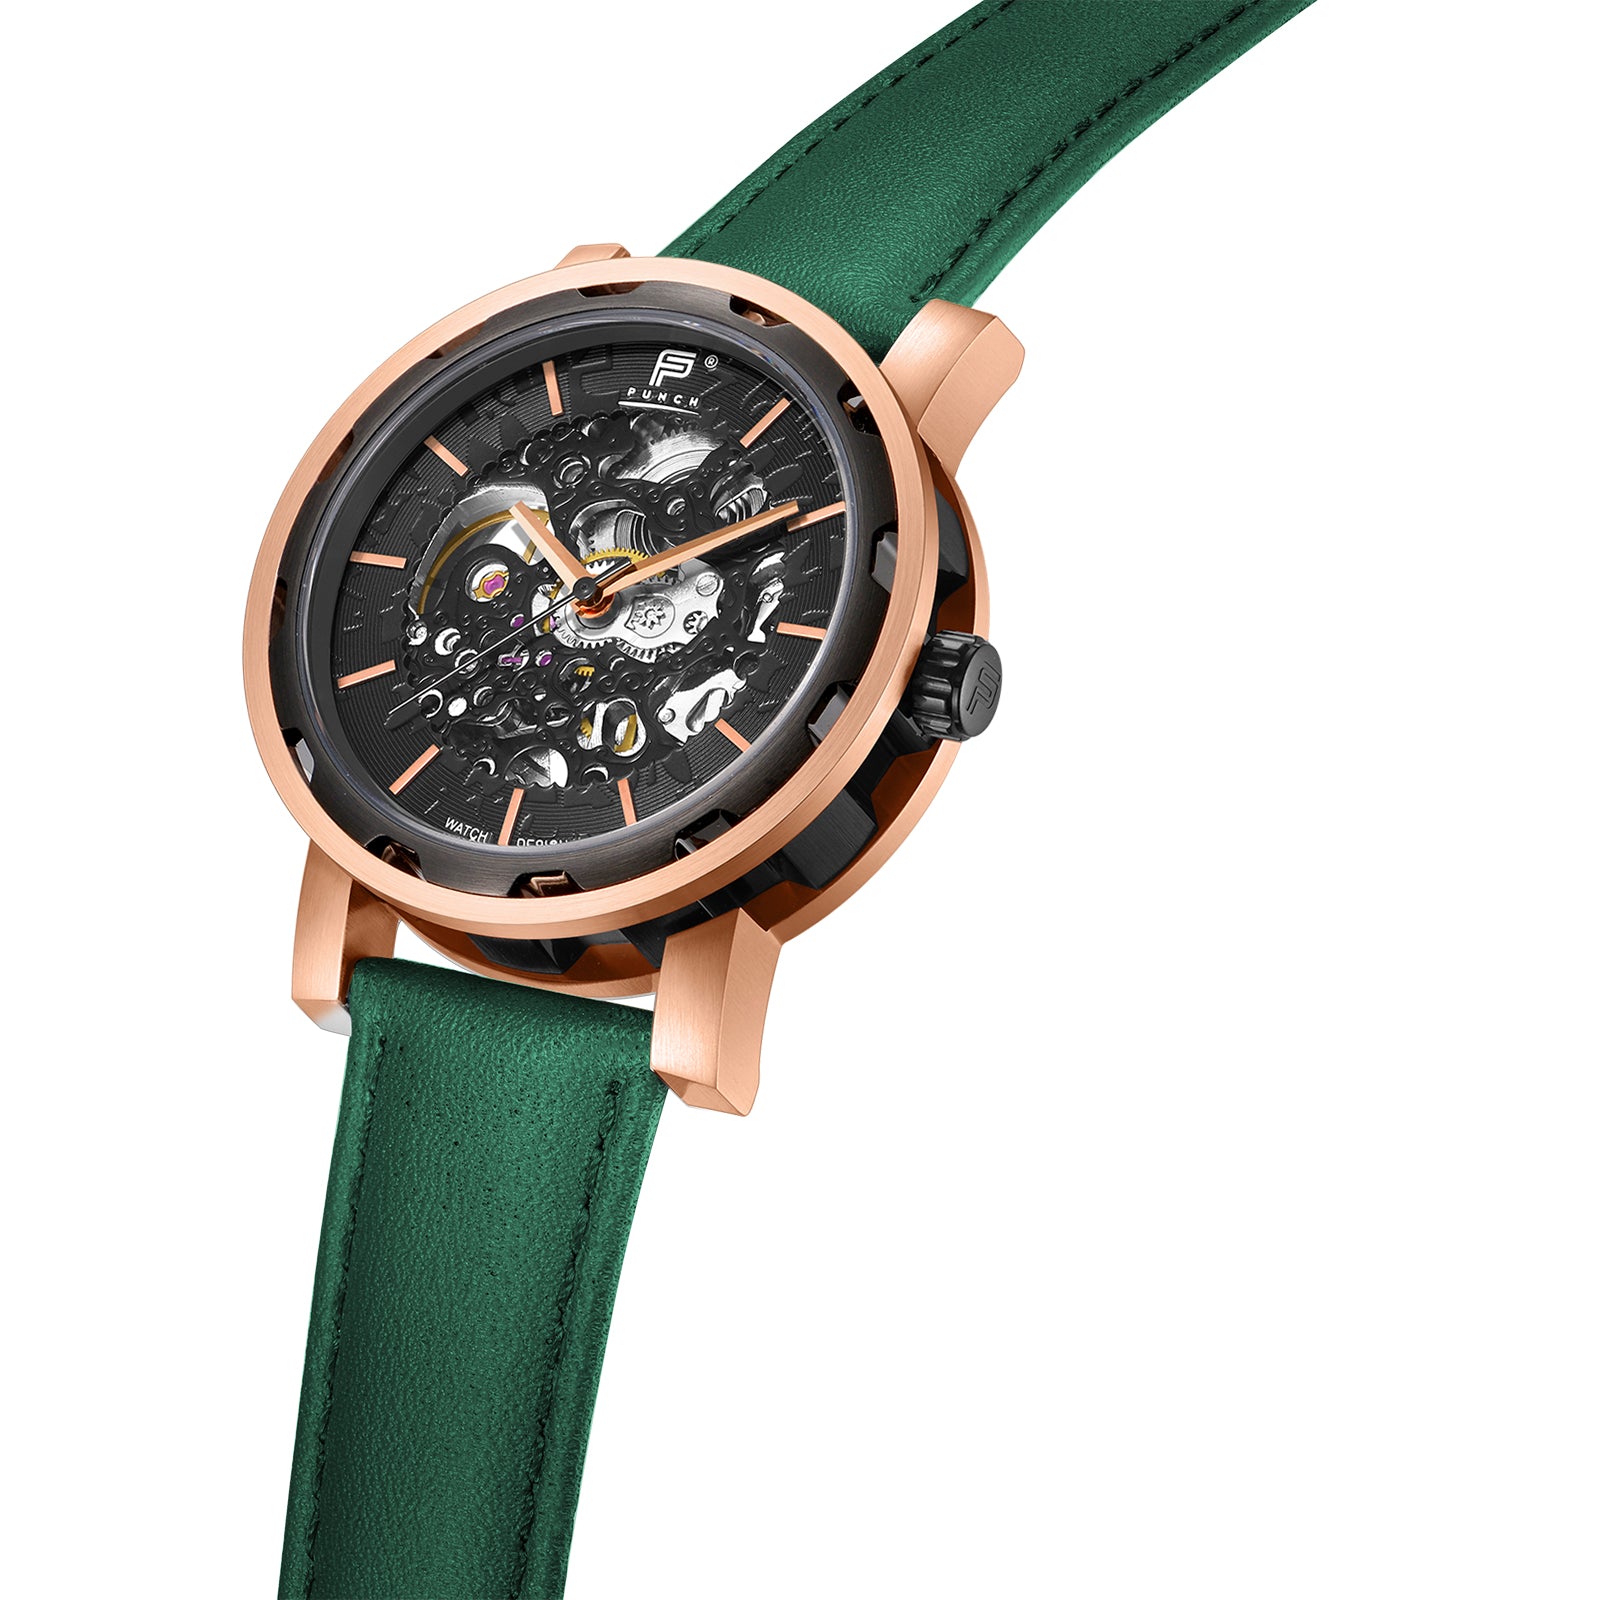 Men's Rose Gold Automatic Skeleton Watch with Black Face and Green Leather Strap - Side View